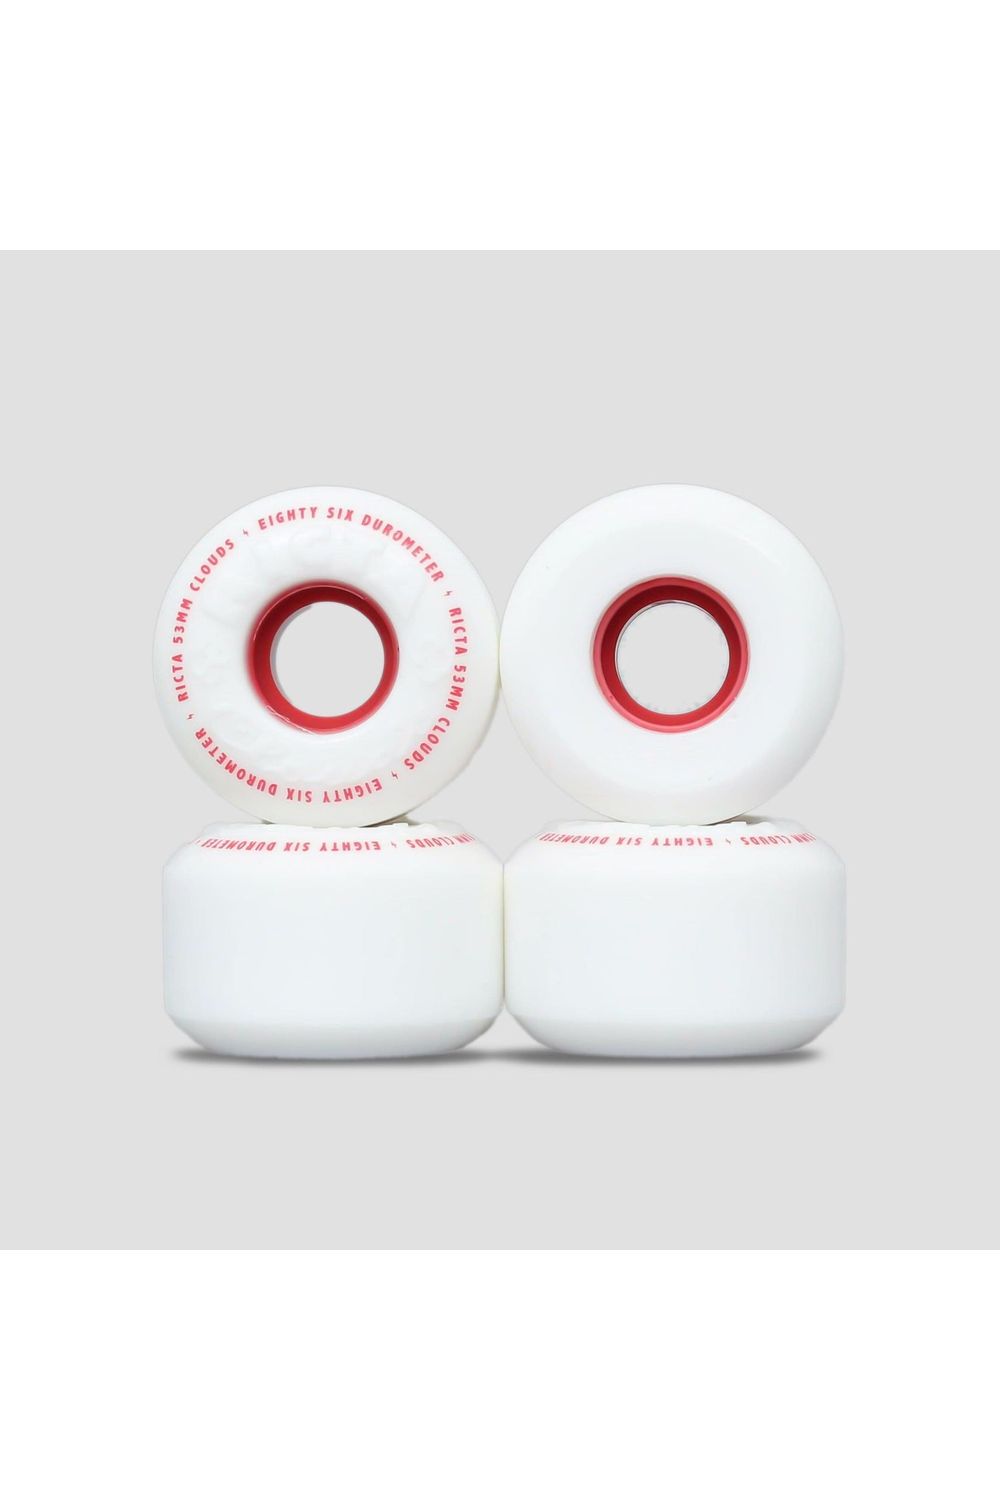 Ricta Wheels Clouds 86a White/Red 53 MM